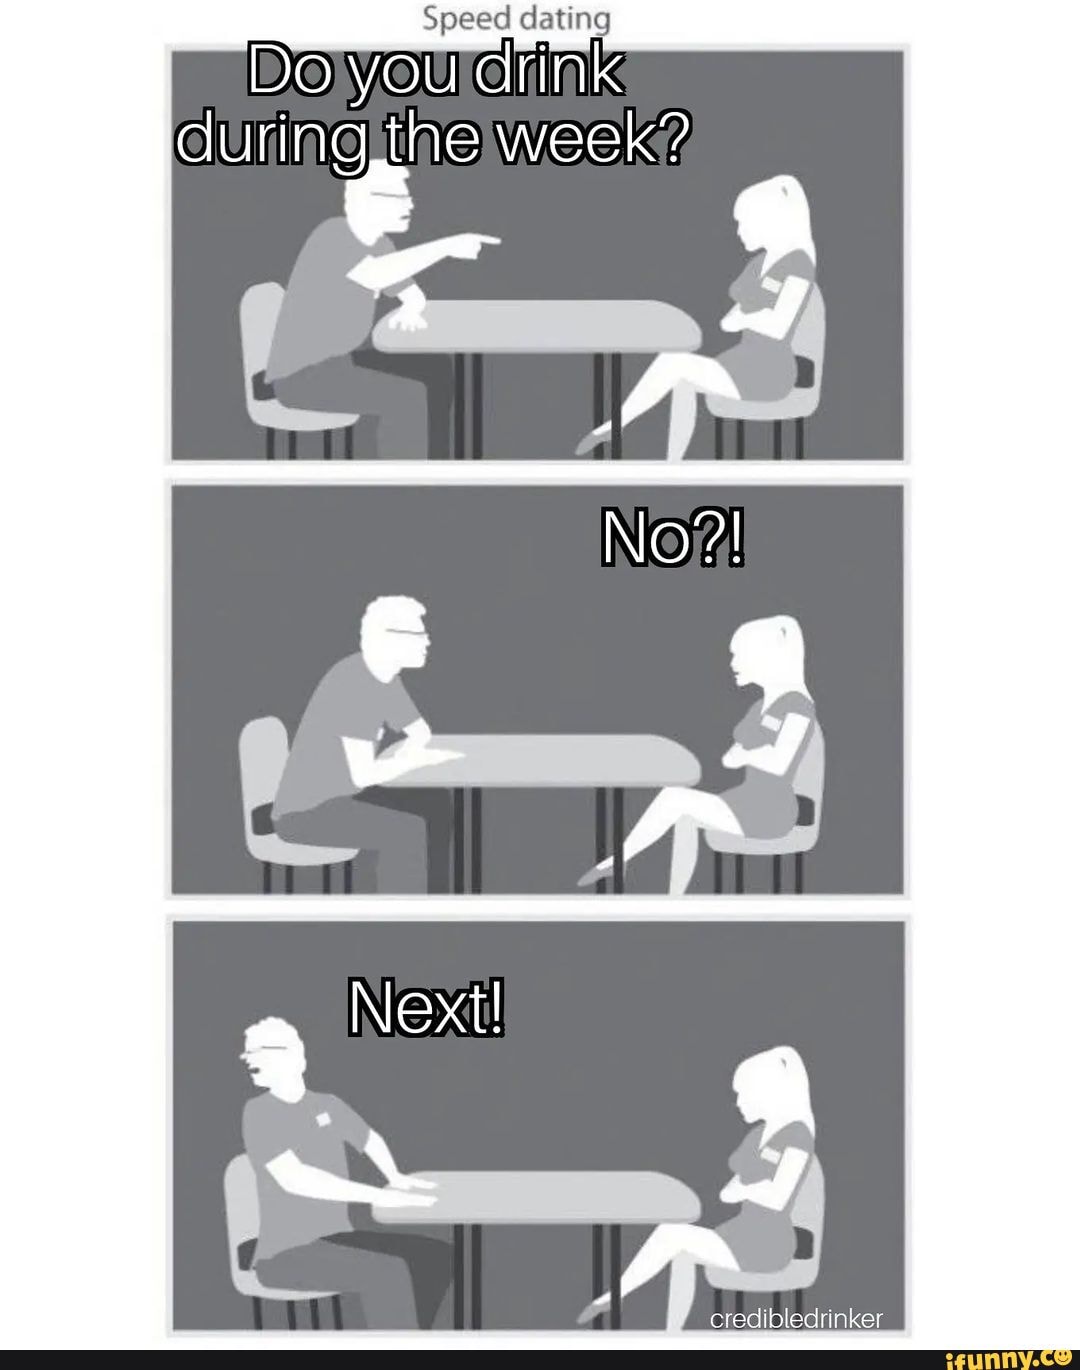 Speed dating funny